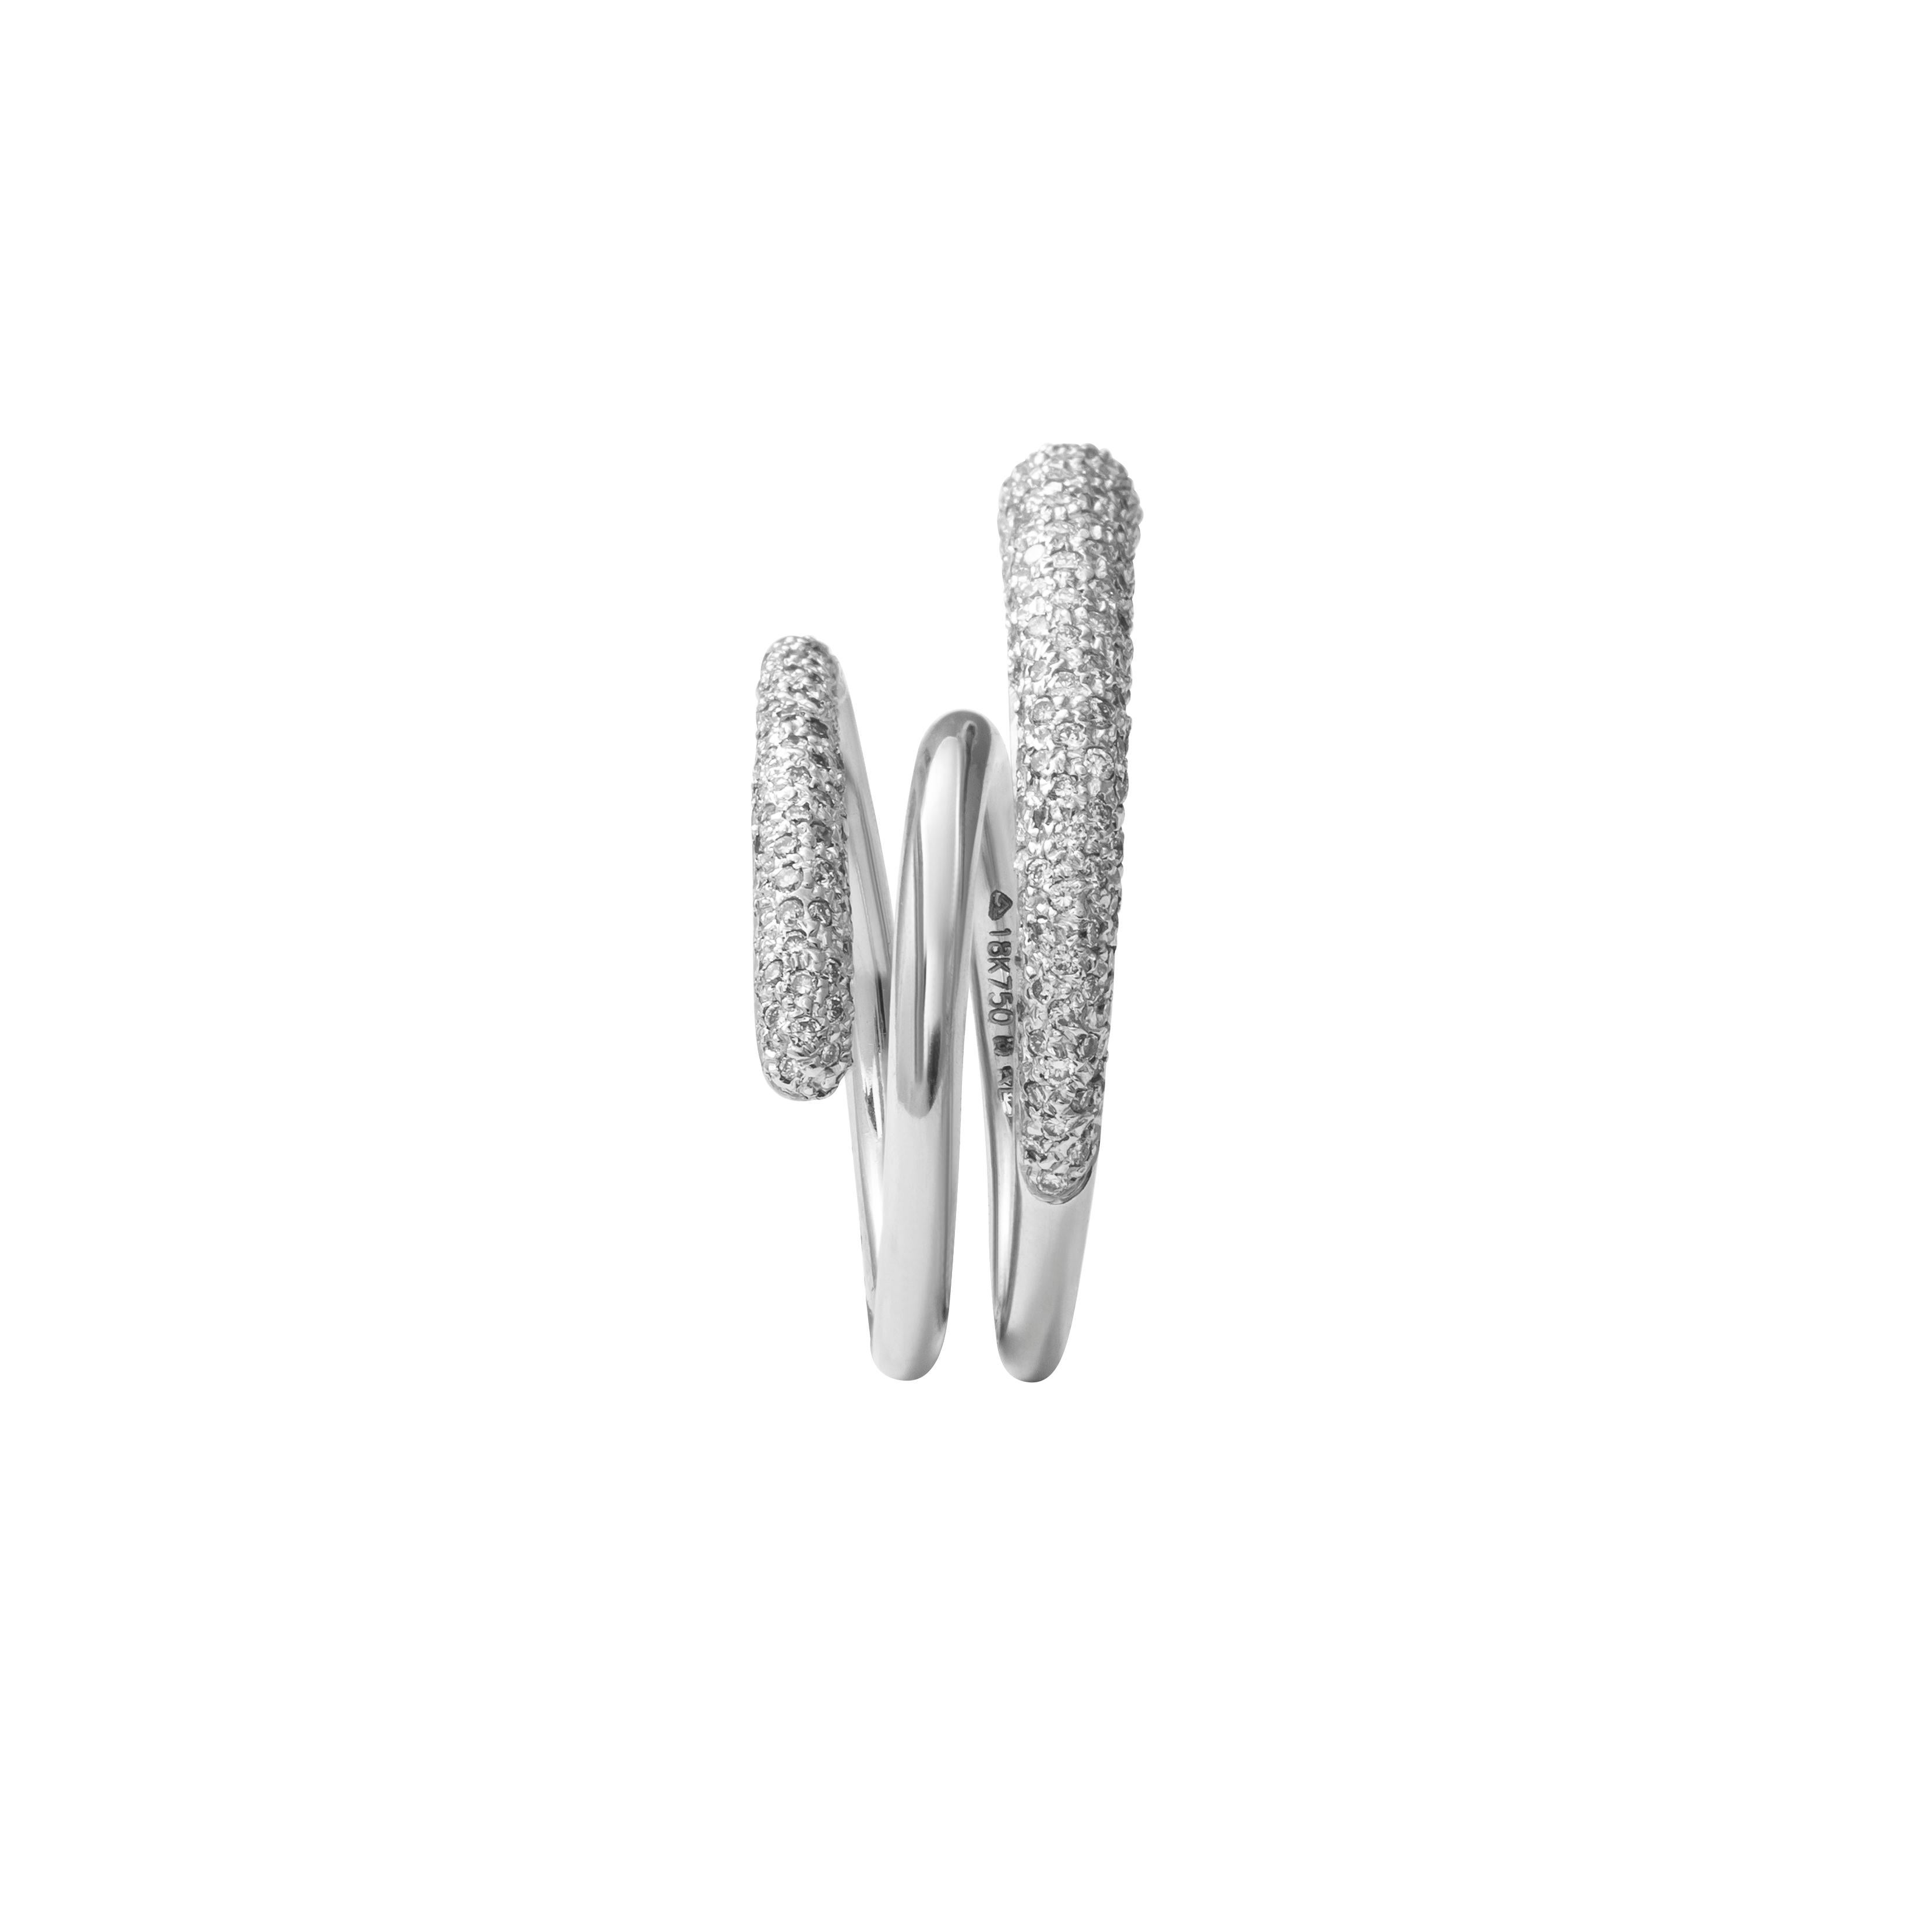 18 Karat White Gold Diamond Spiral Ring

This funky and one of a kind spiral designed ring set in 18 karat white gold, studded with vvs-vs quality diamonds is sure to turn heads! Unique and trendy it is perfect for evening wear, especially